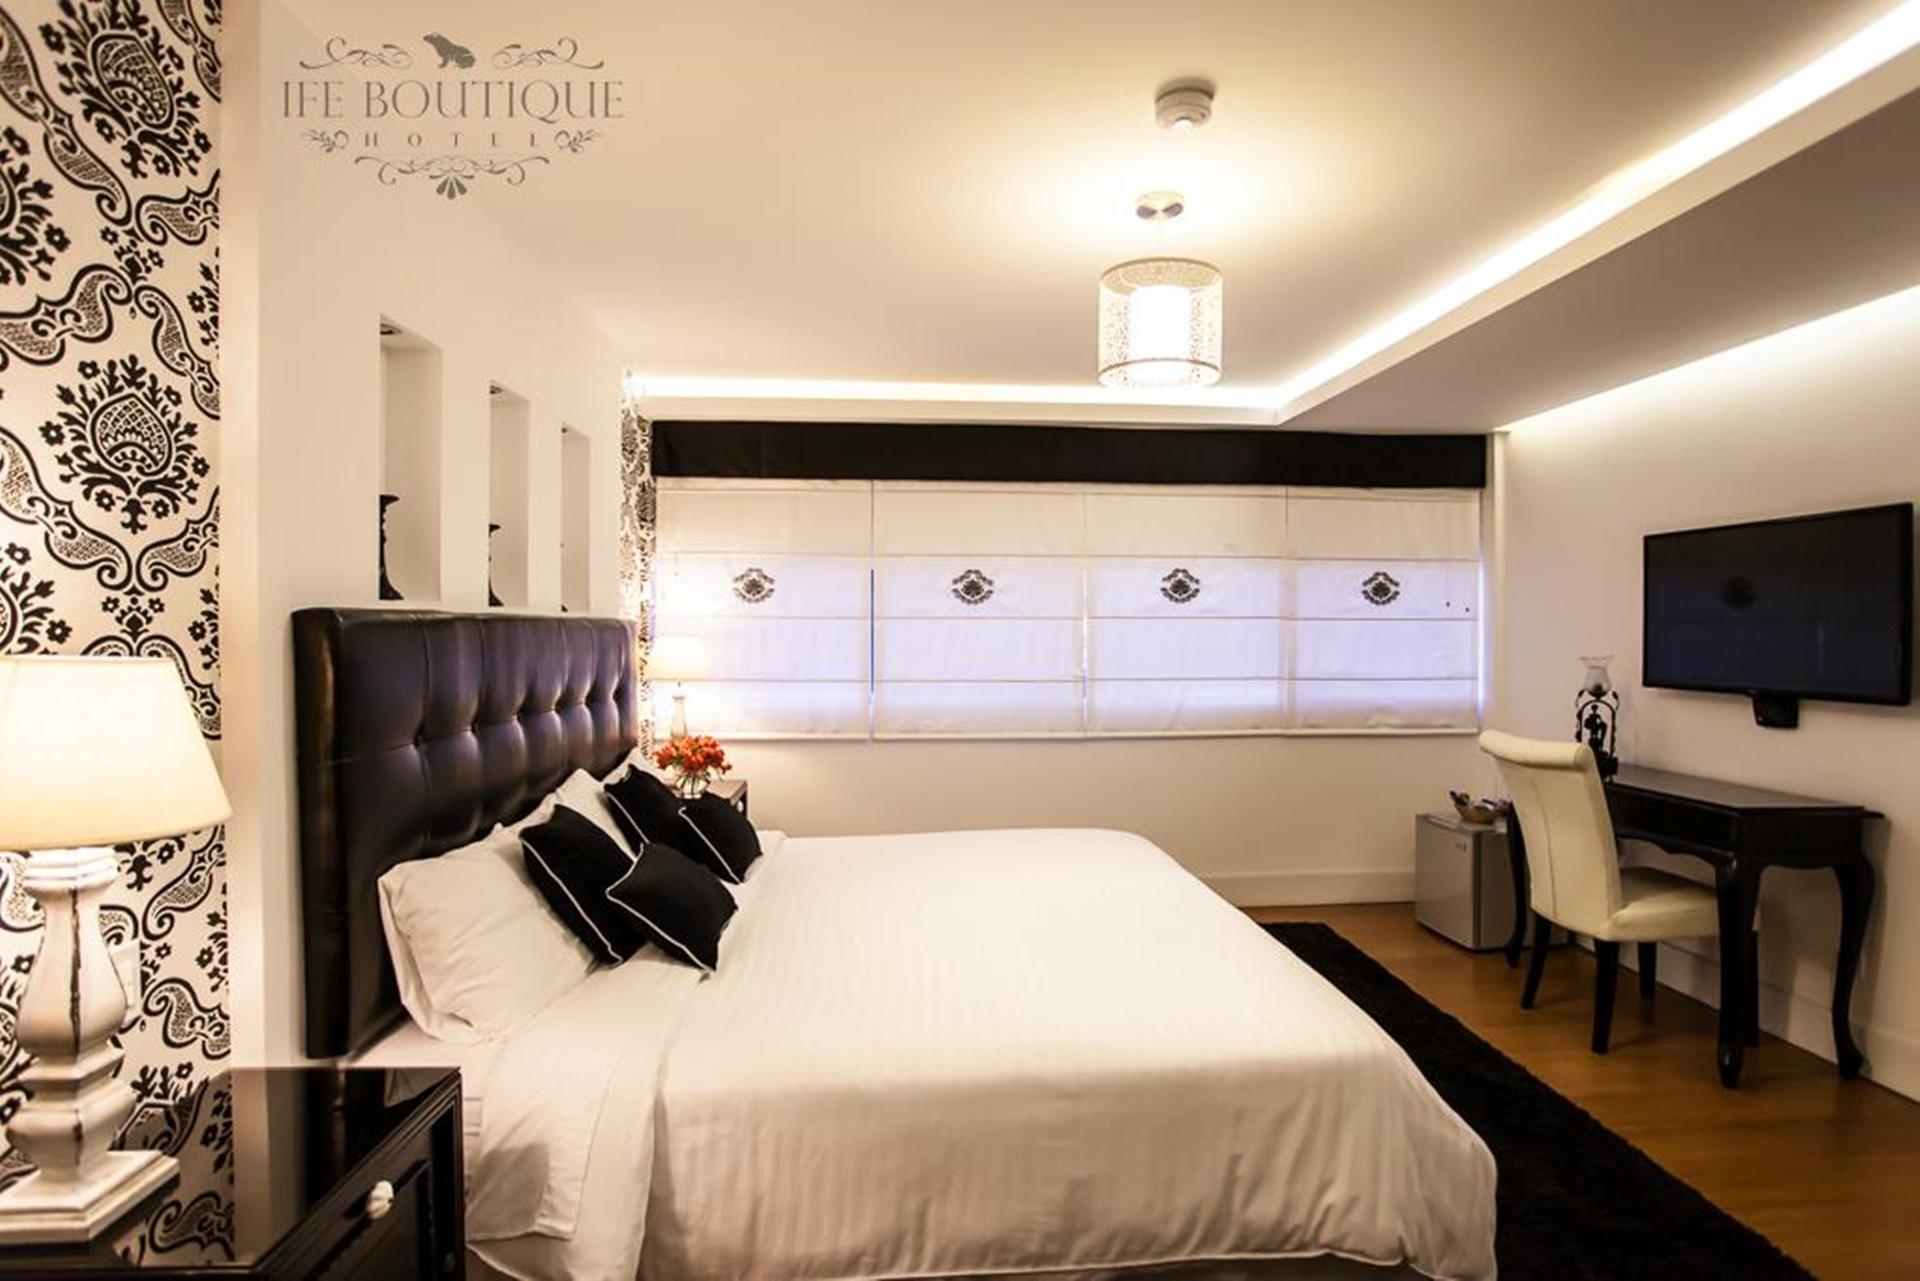 Guest room Ife Boutique